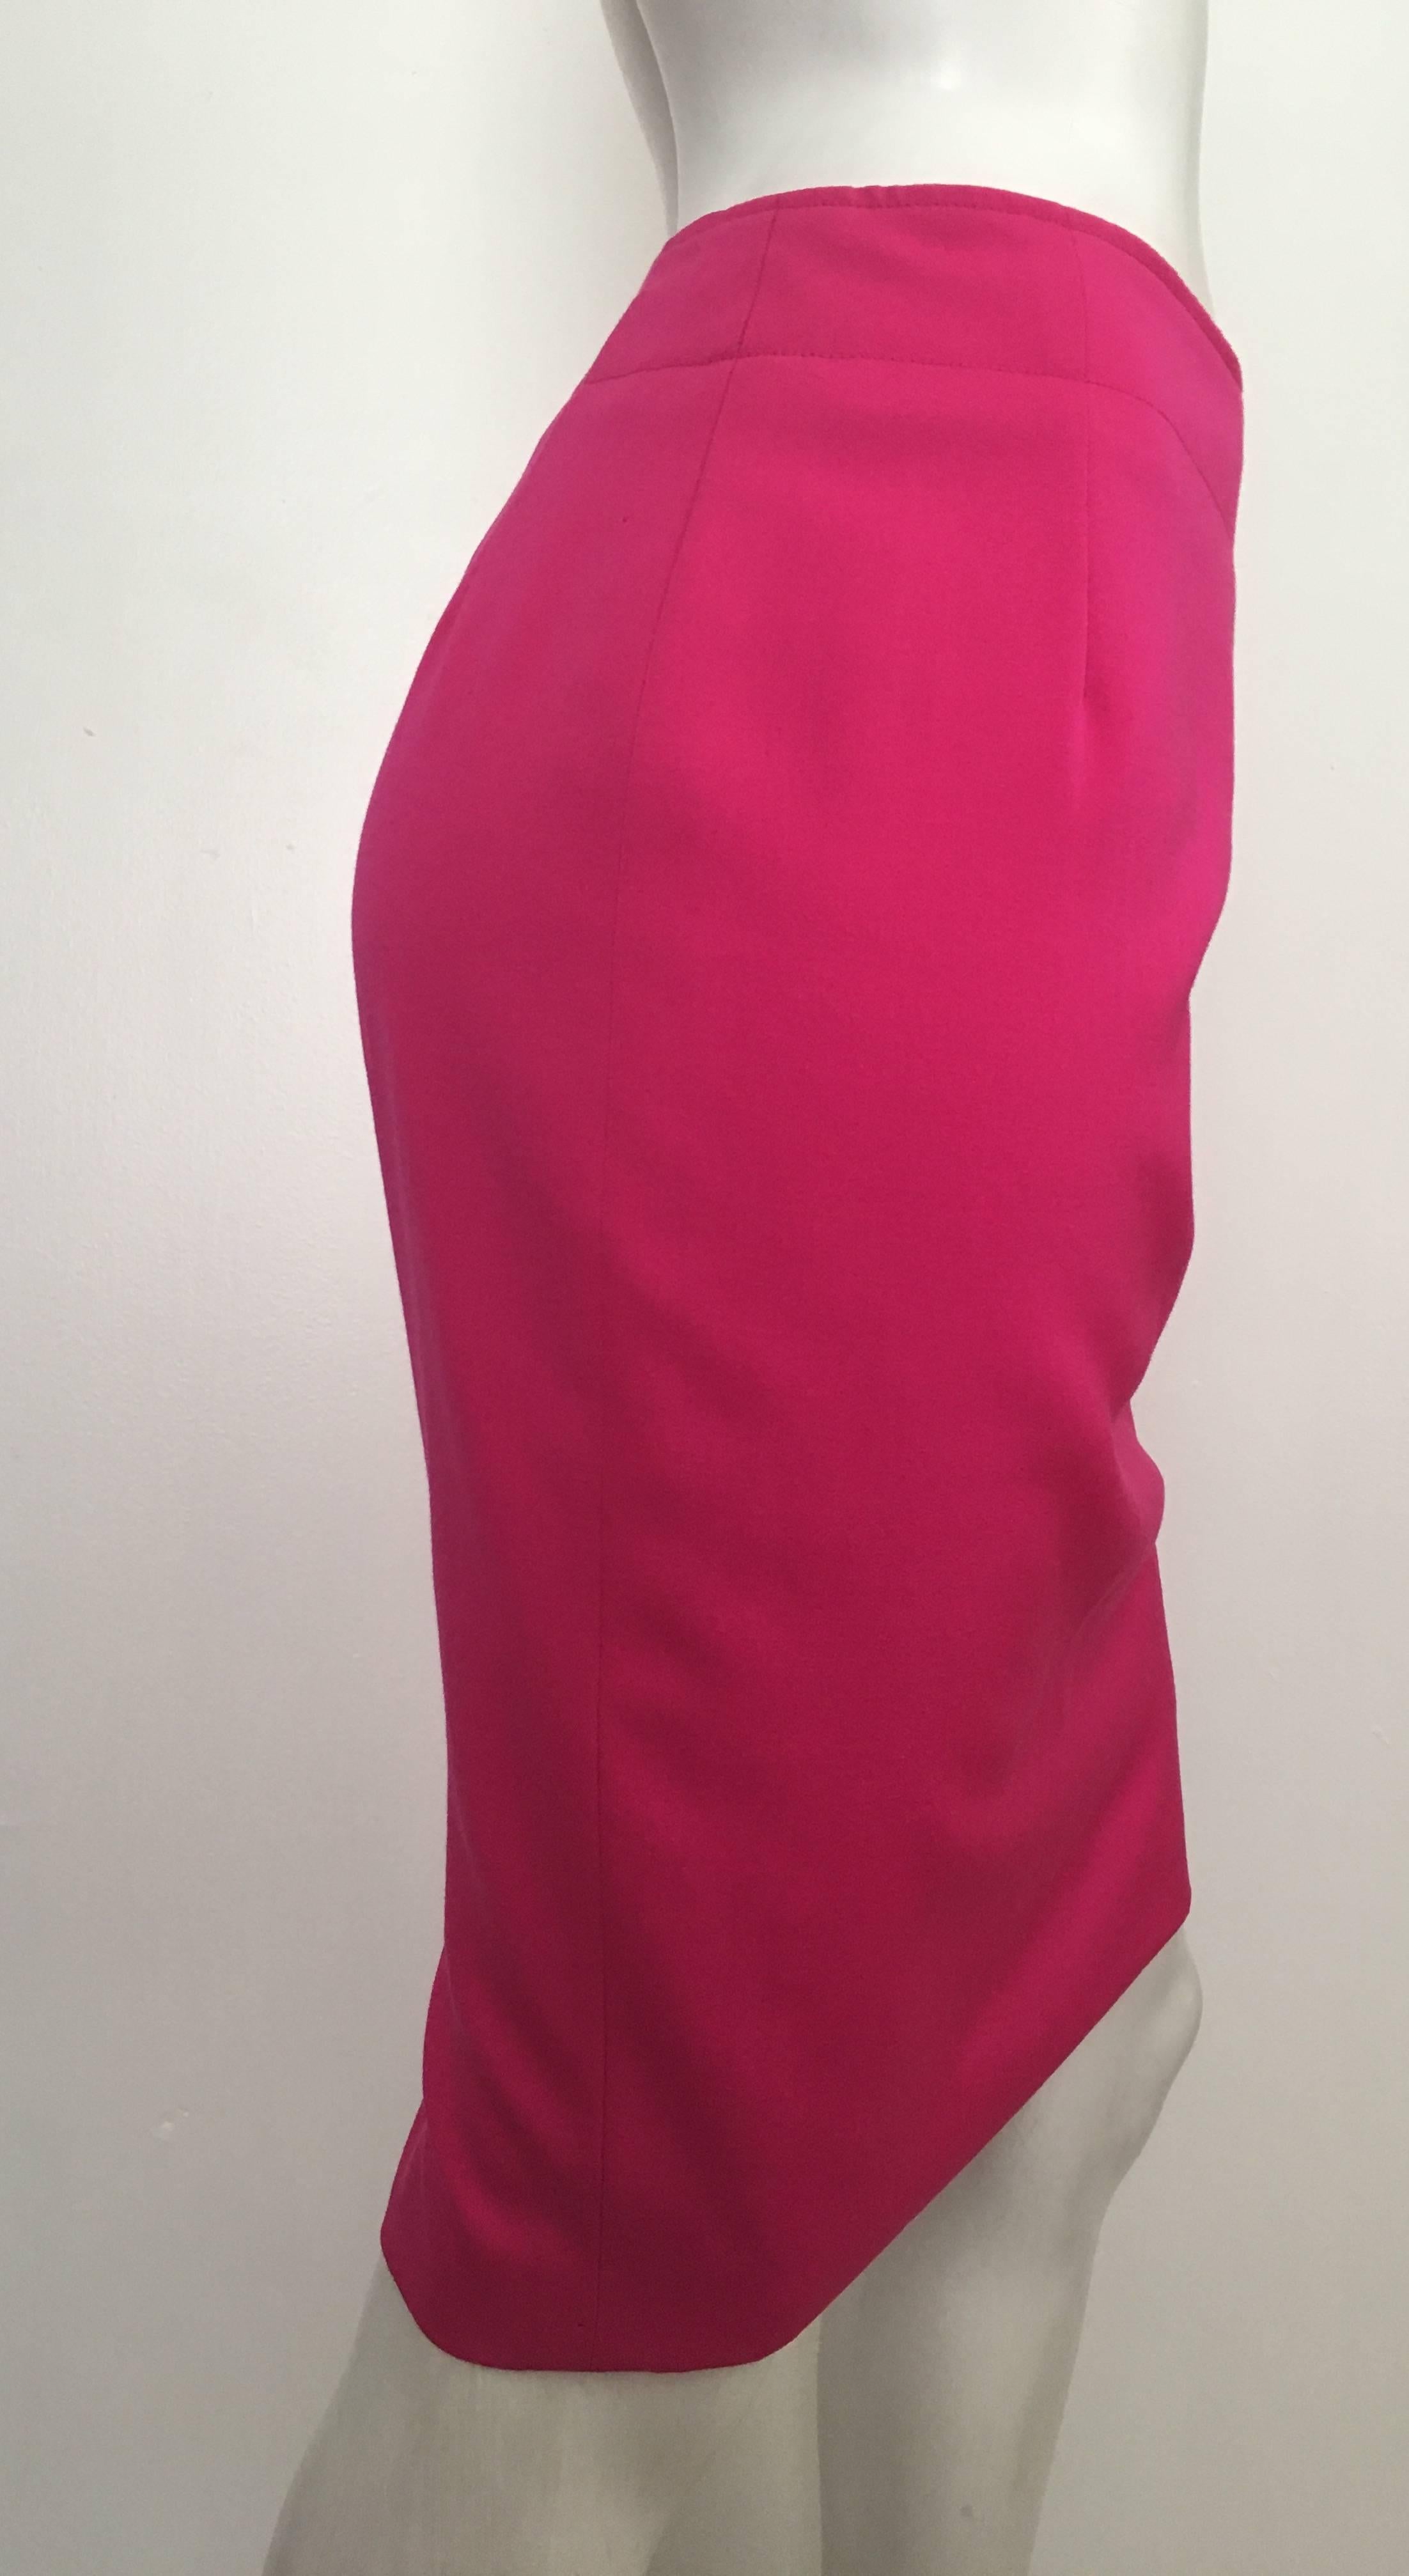 Lolita Lempicka 1980s wool gorgeous hot pink color sexy pencil skirt is a French vintage size 38 but fits like a modern USA size 6.  Ladies please use your measuring tape to properly measure your waist & hips to make sure this vintage treasure